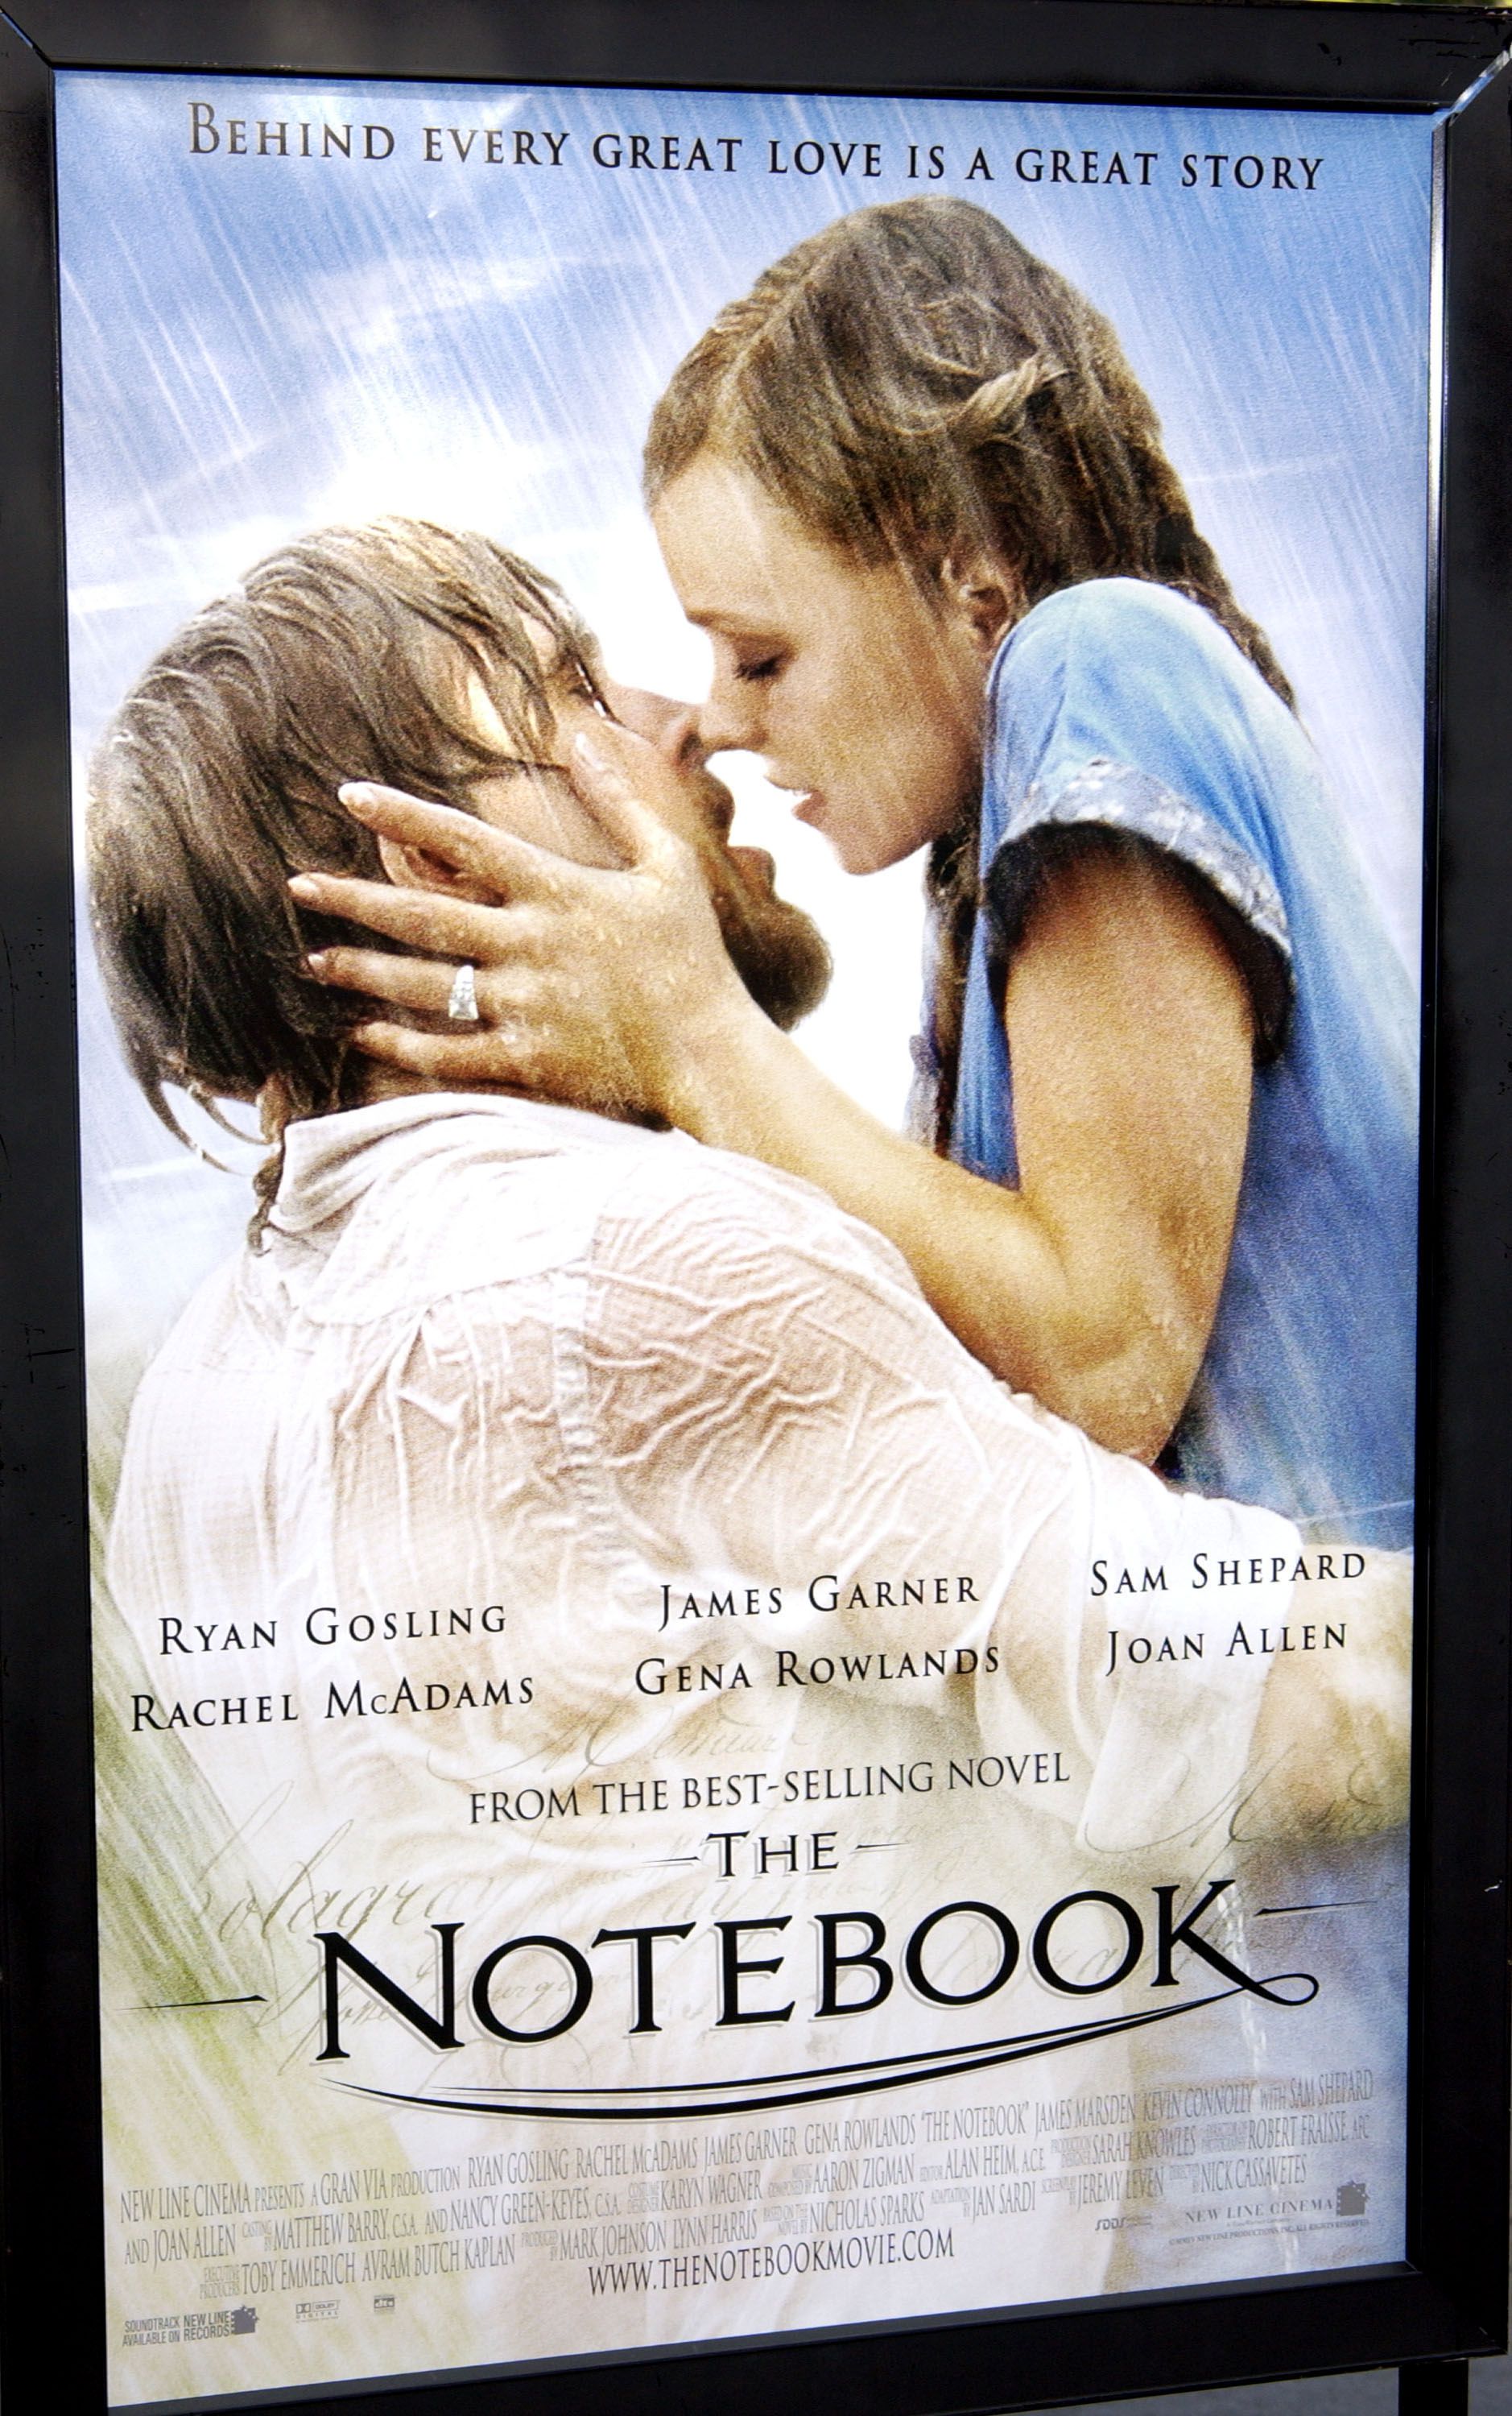 Notebook Movie Quotes Are Great for Teens The Movie Not Really